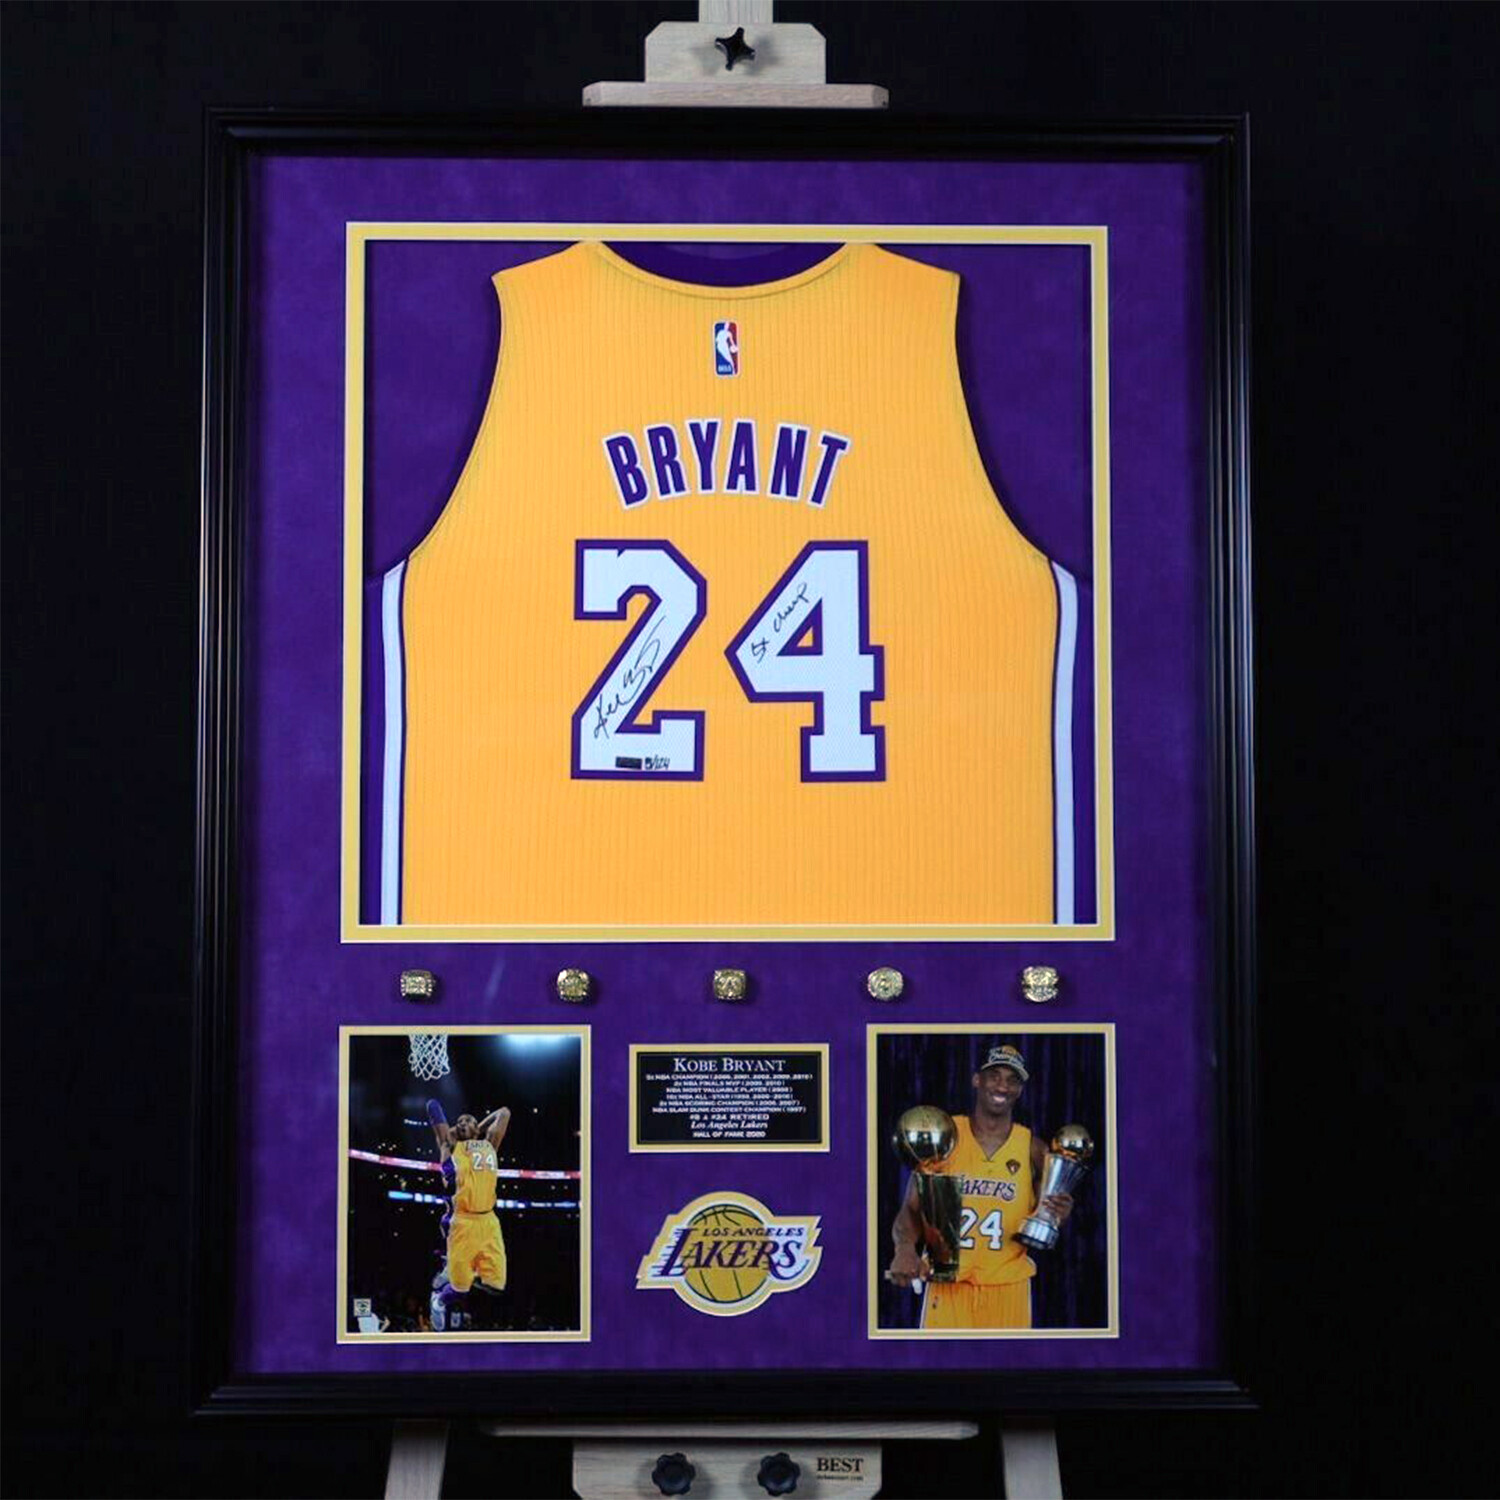 Kobe Bryant Autographed and Framed Purple Los Angeles Lakers Jersey